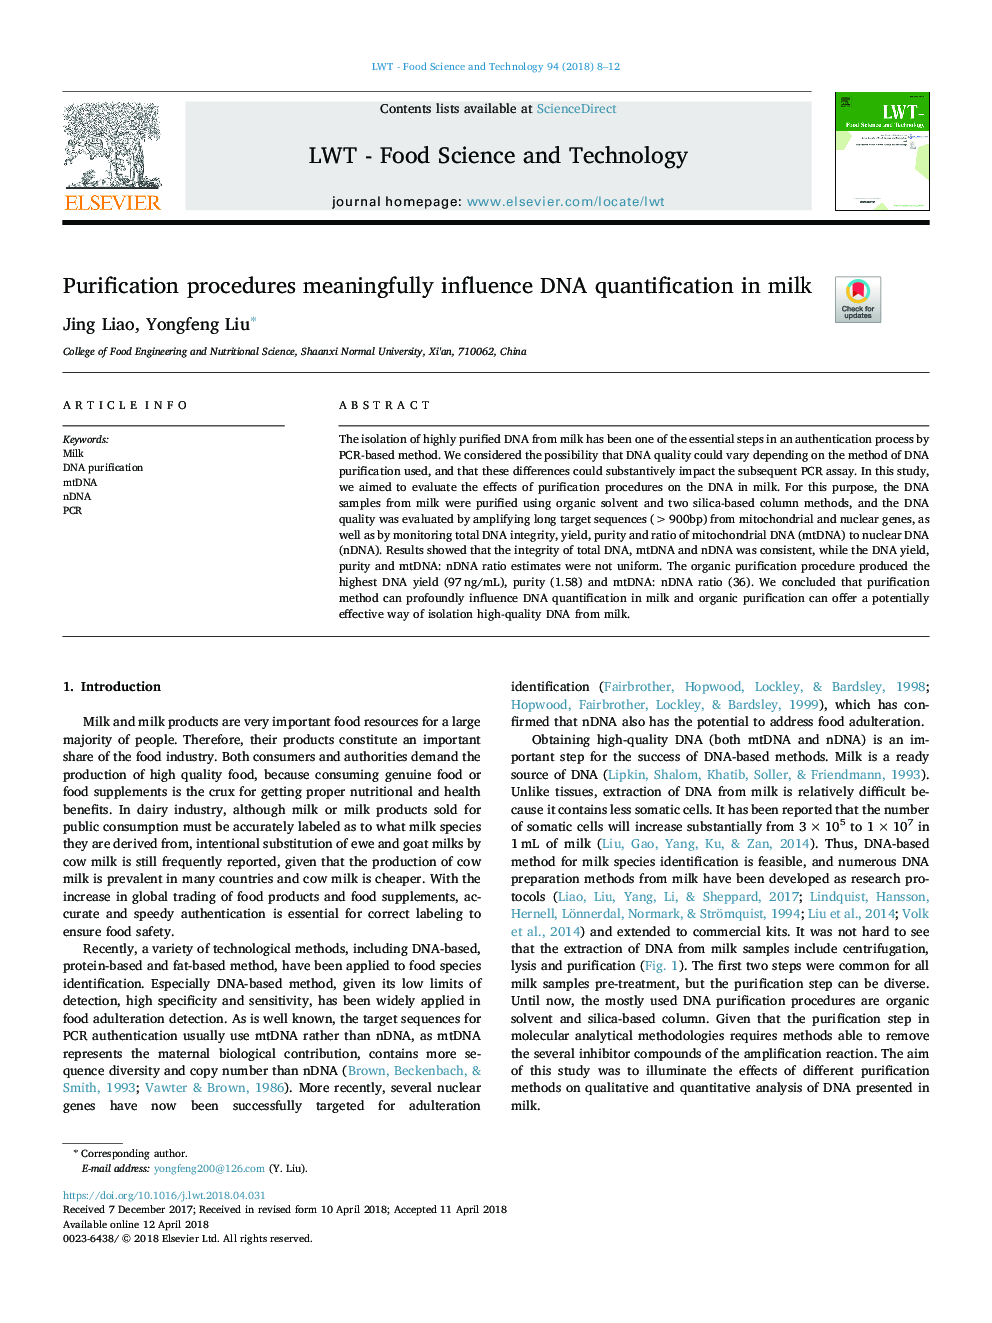 Purification procedures meaningfully influence DNA quantification in milk